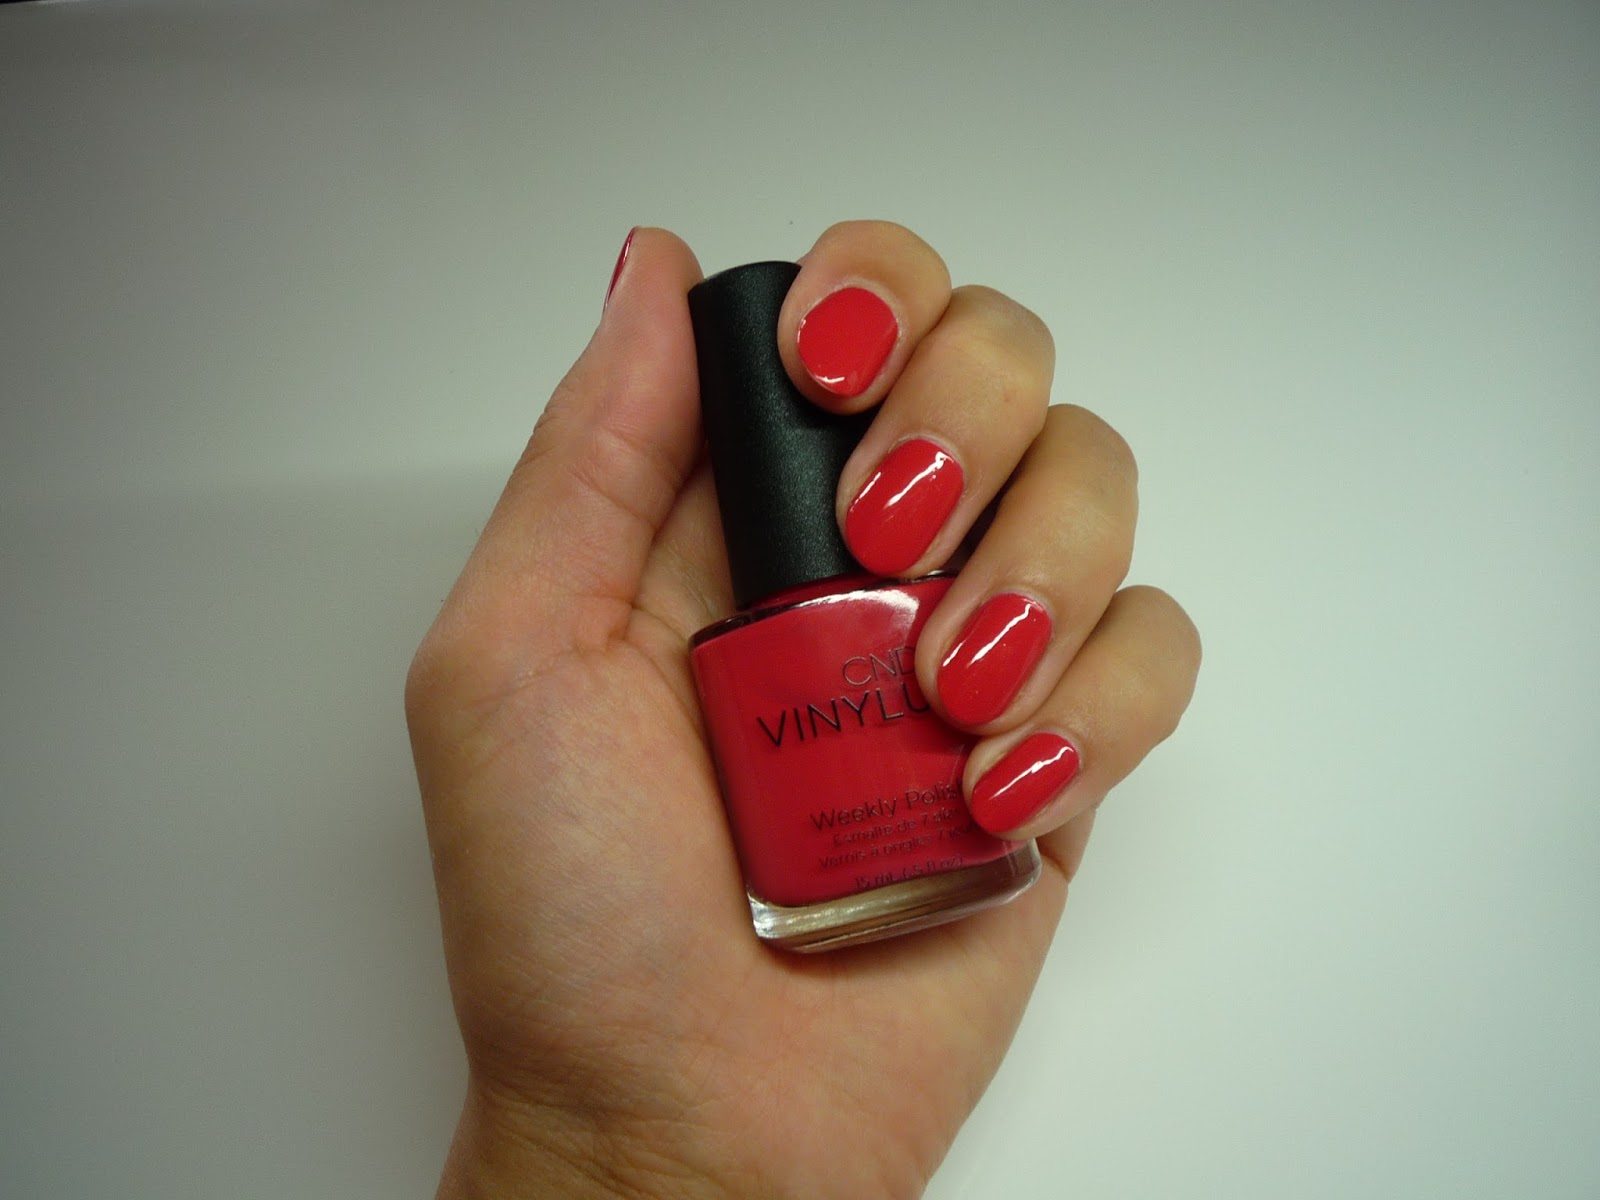 10. "CND Vinylux in Lobster Roll" - wide 5